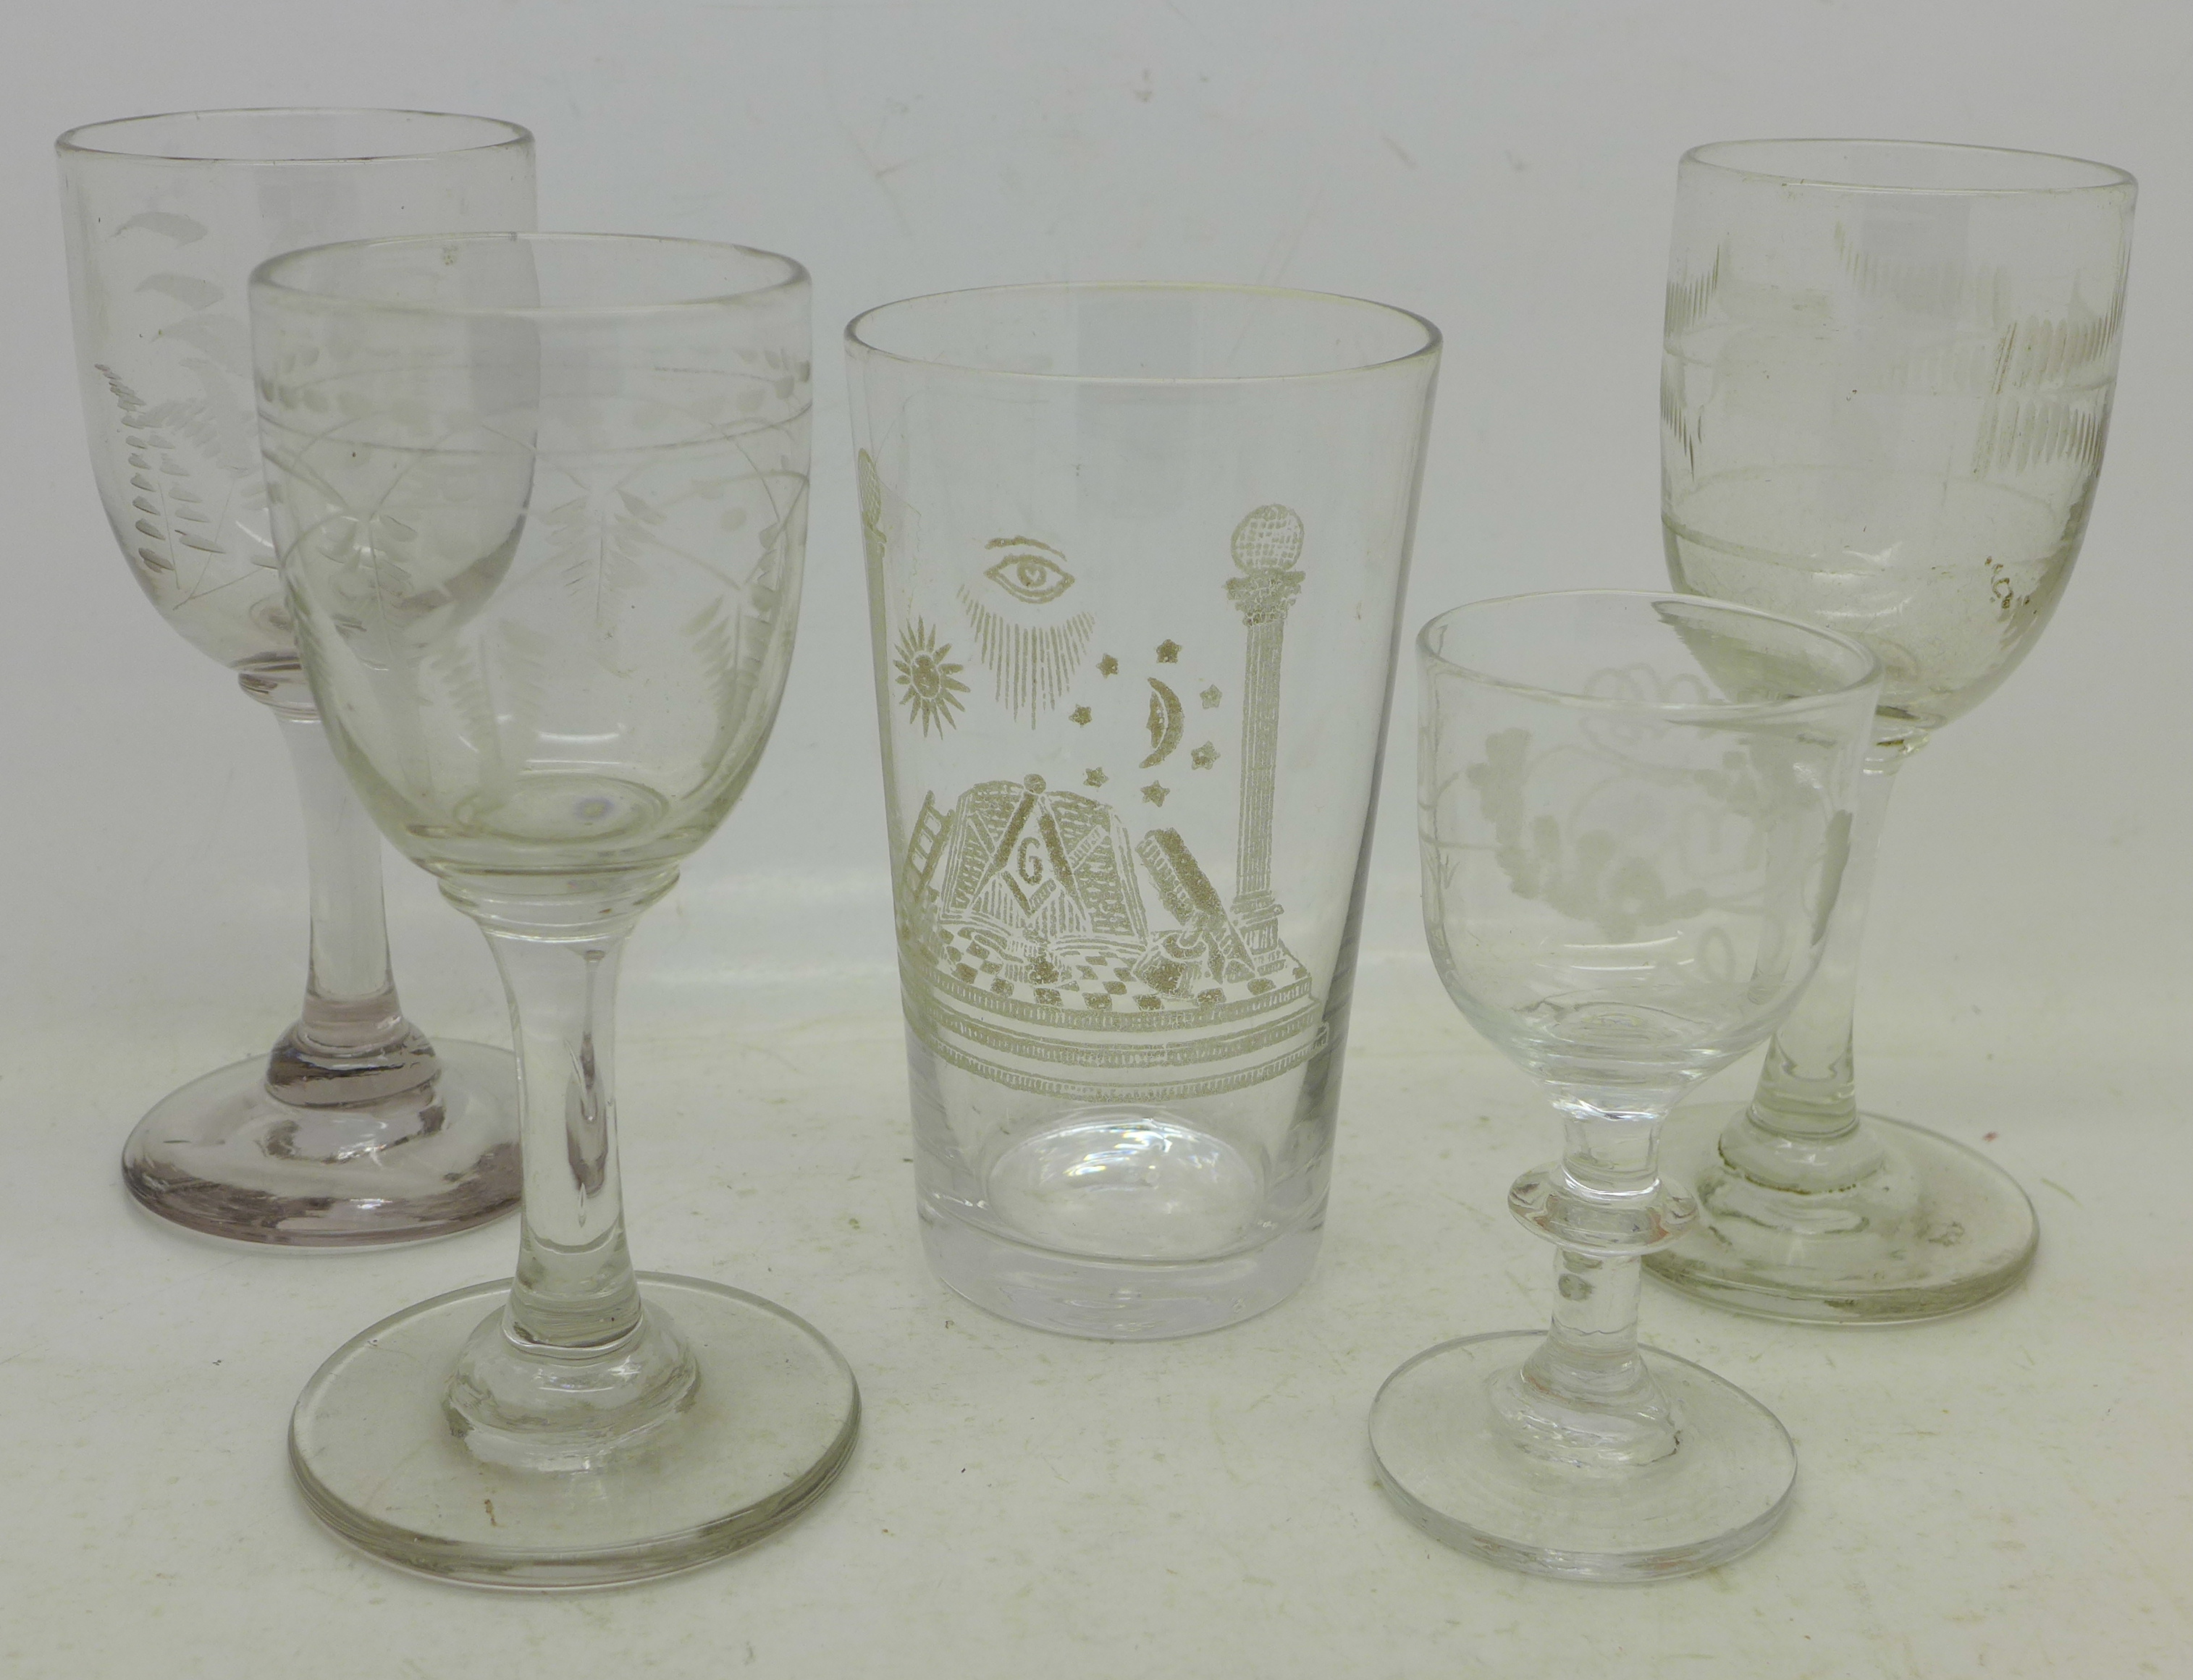 Four etched Georgian glasses and a Masonic glass - Image 2 of 2